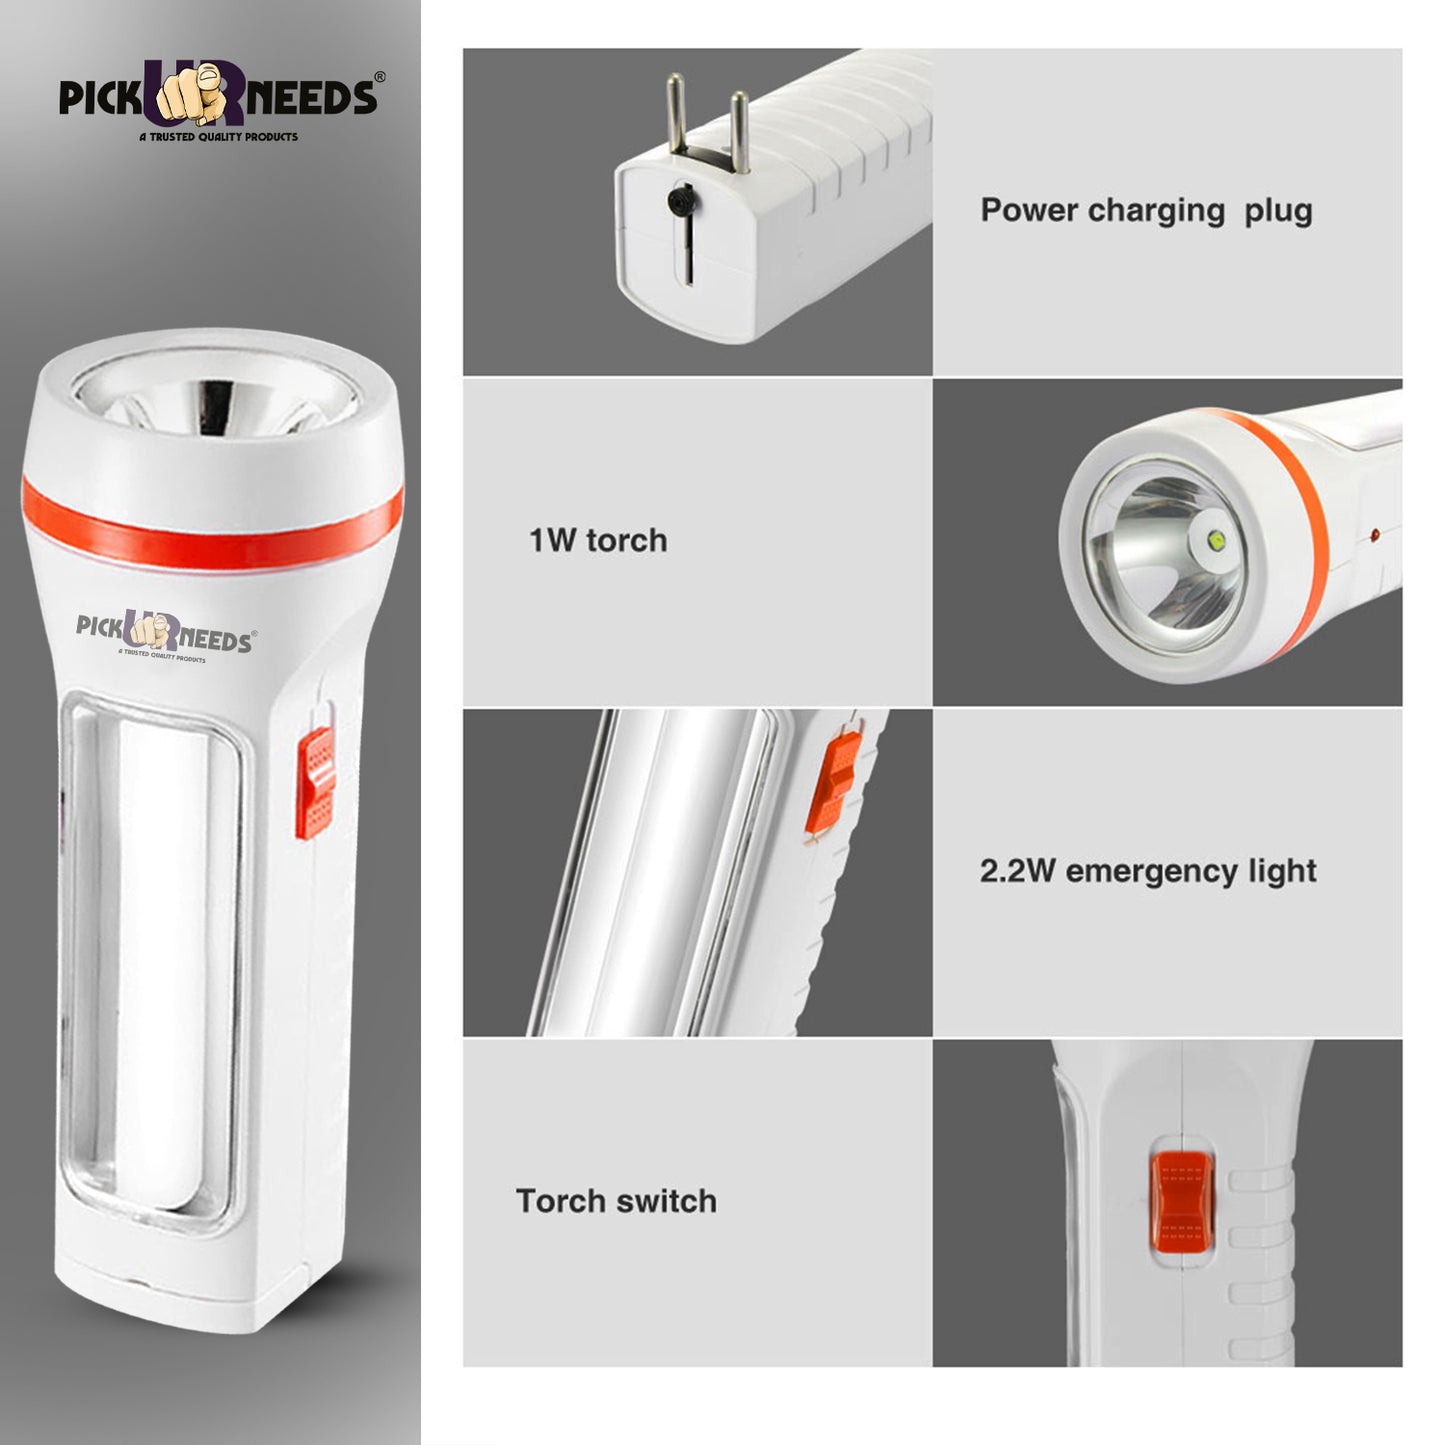 Pick Ur Needs Emergency LED Rechargeable 35W Search Torch Light With Slide Charging Plug